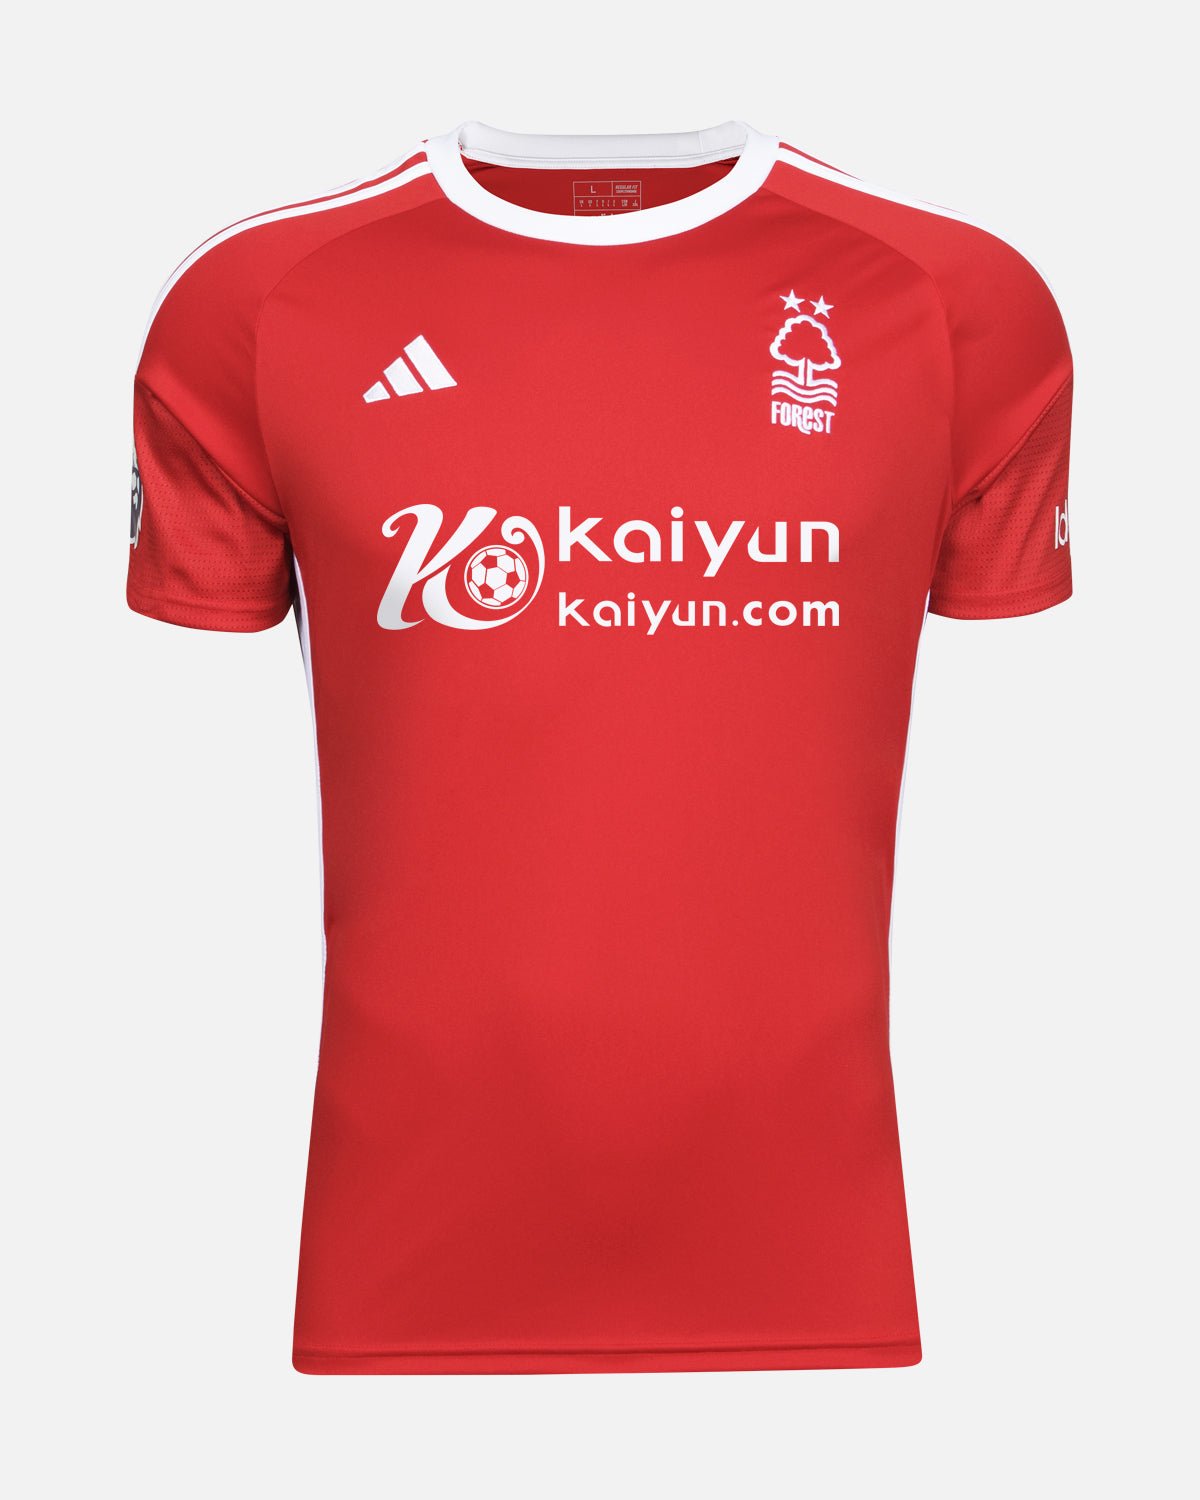 NFFC Home Shirt 23-24 - Aina 43 - Nottingham Forest FC